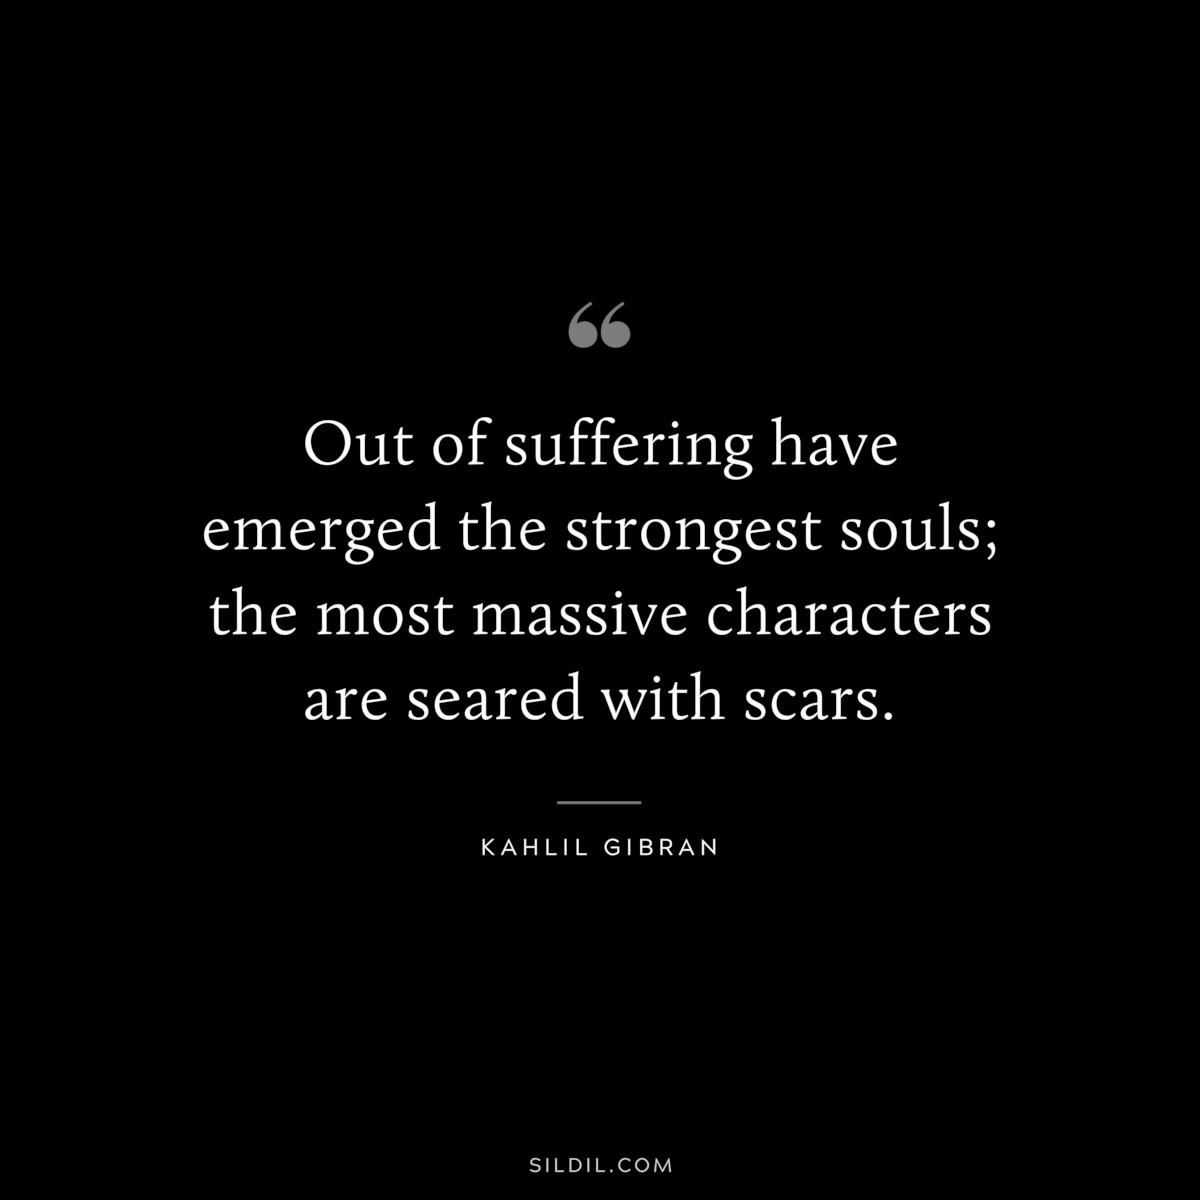 Out of suffering have emerged the strongest souls; the most massive characters are seared with scars. ― Kahlil Gibran